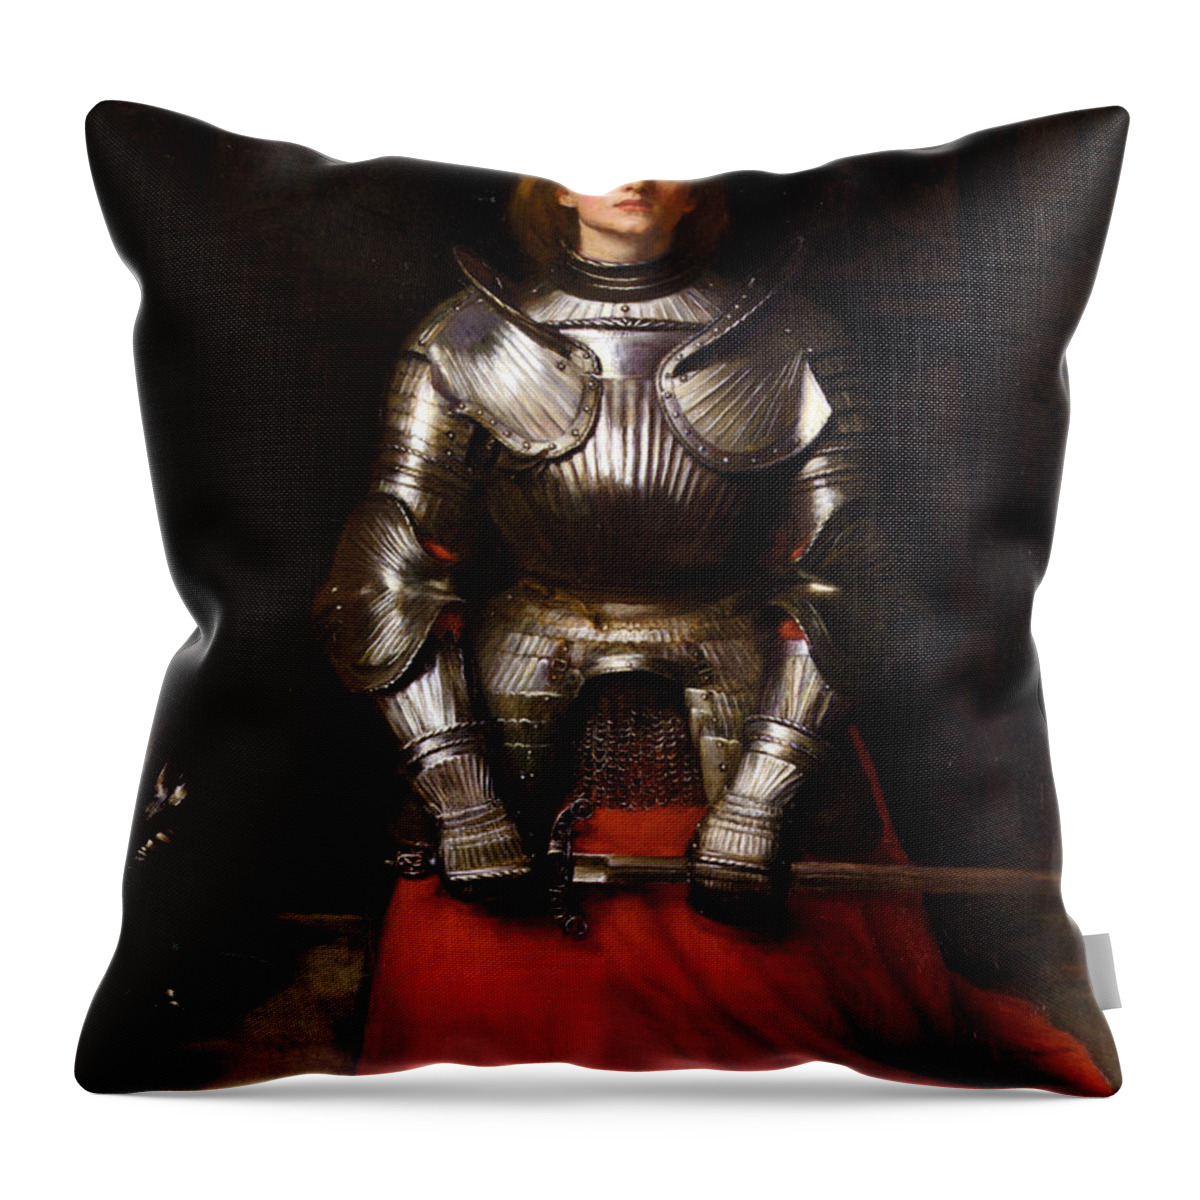 Joan Of Arc Throw Pillow featuring the digital art Joan of Arc by Long Shot